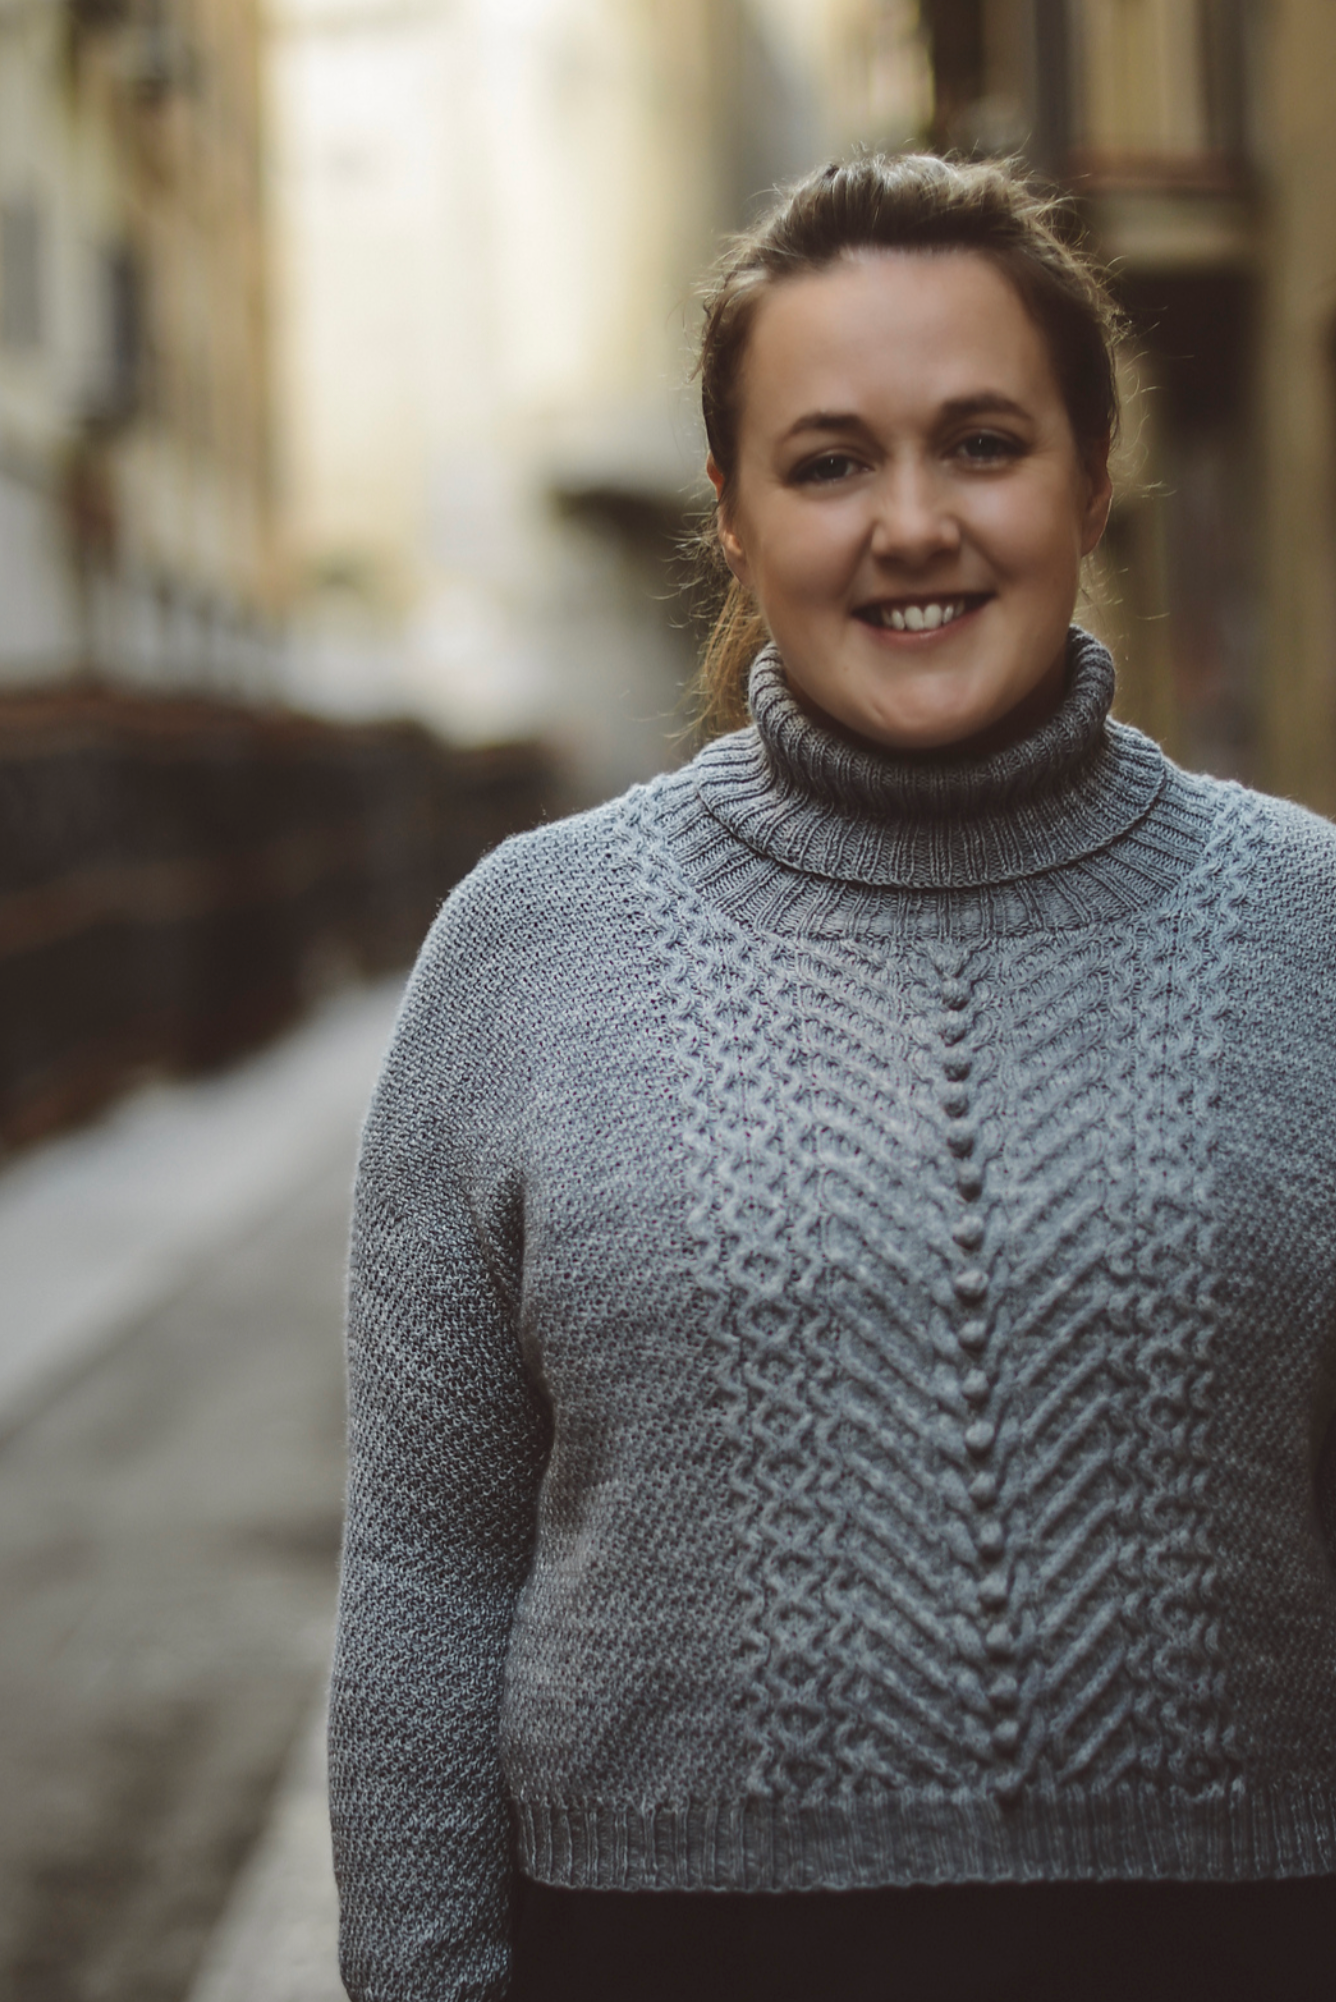 The Old Mill Sweater by Veera Valimaki Kit